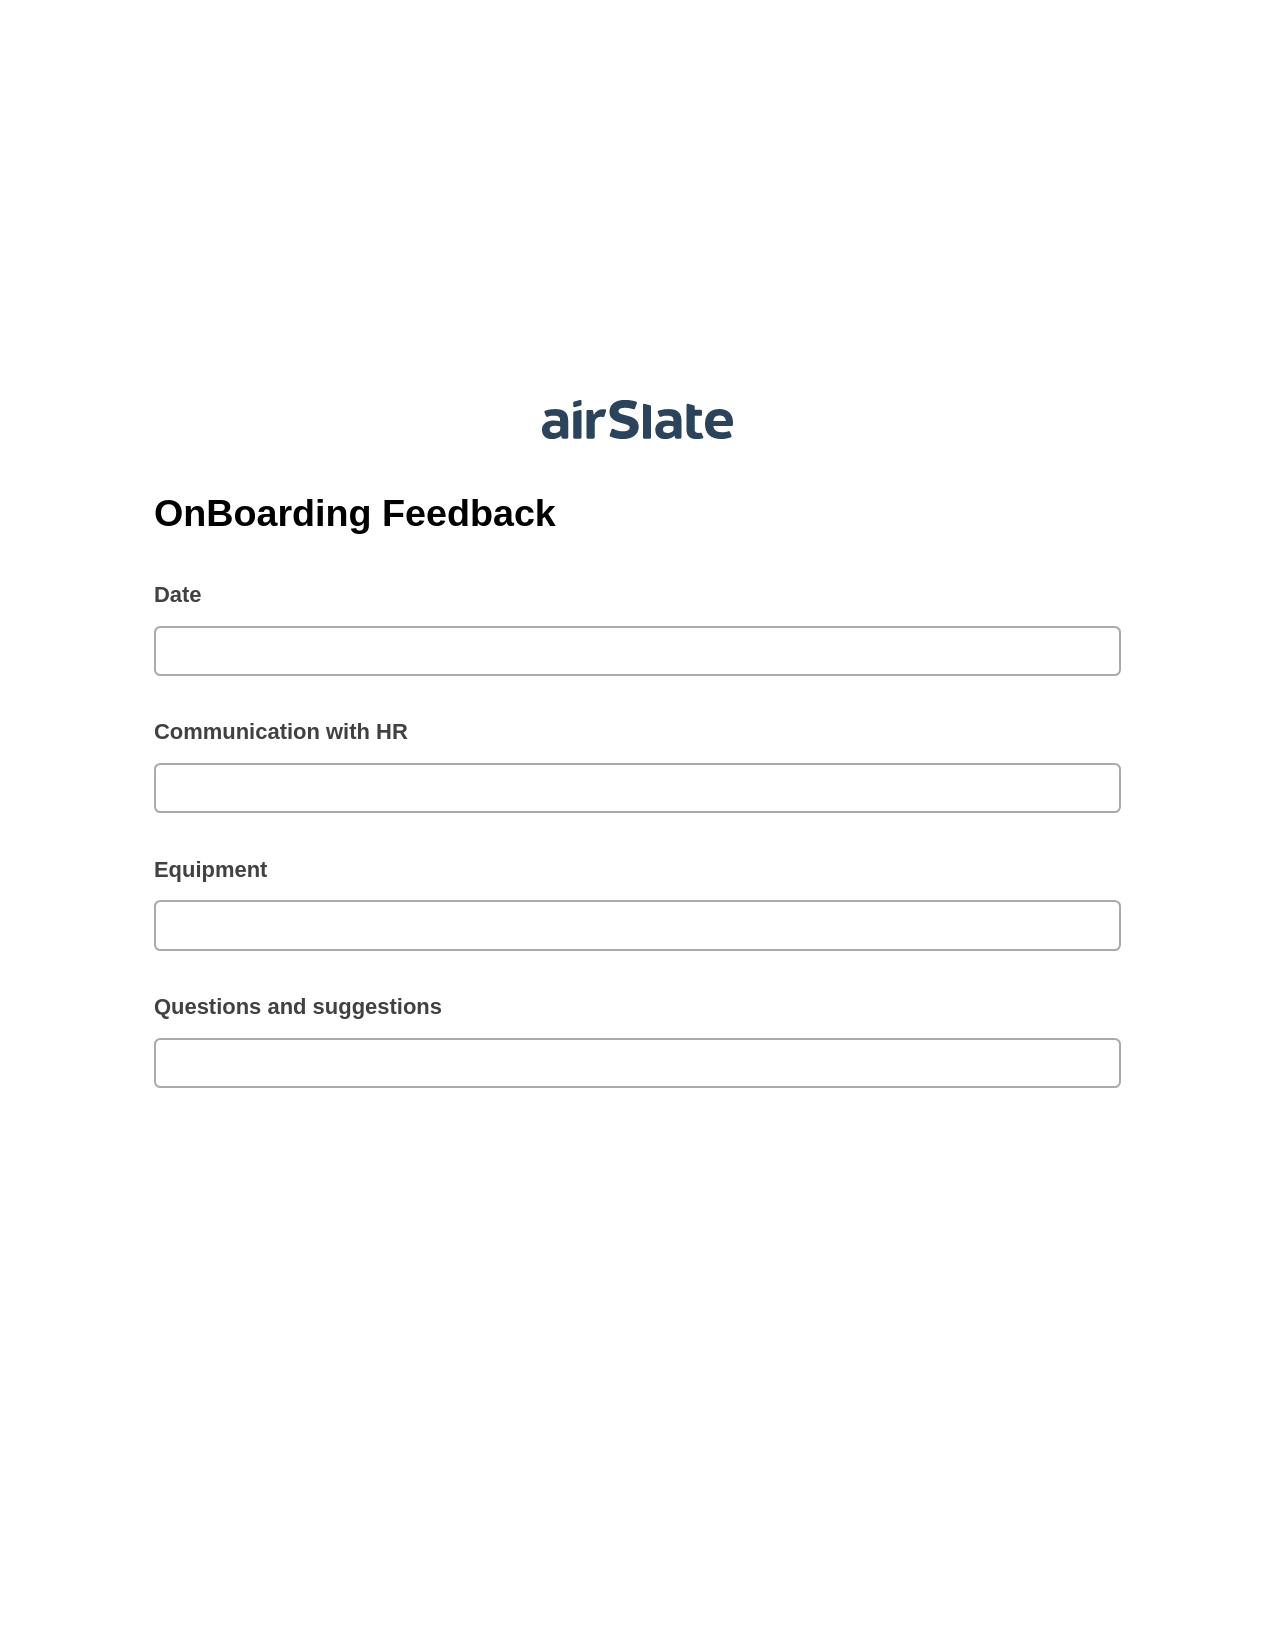 Multirole OnBoarding Feedback Pre-fill from CSV File Bot, Remove Slate Bot, Archive to SharePoint Folder Bot